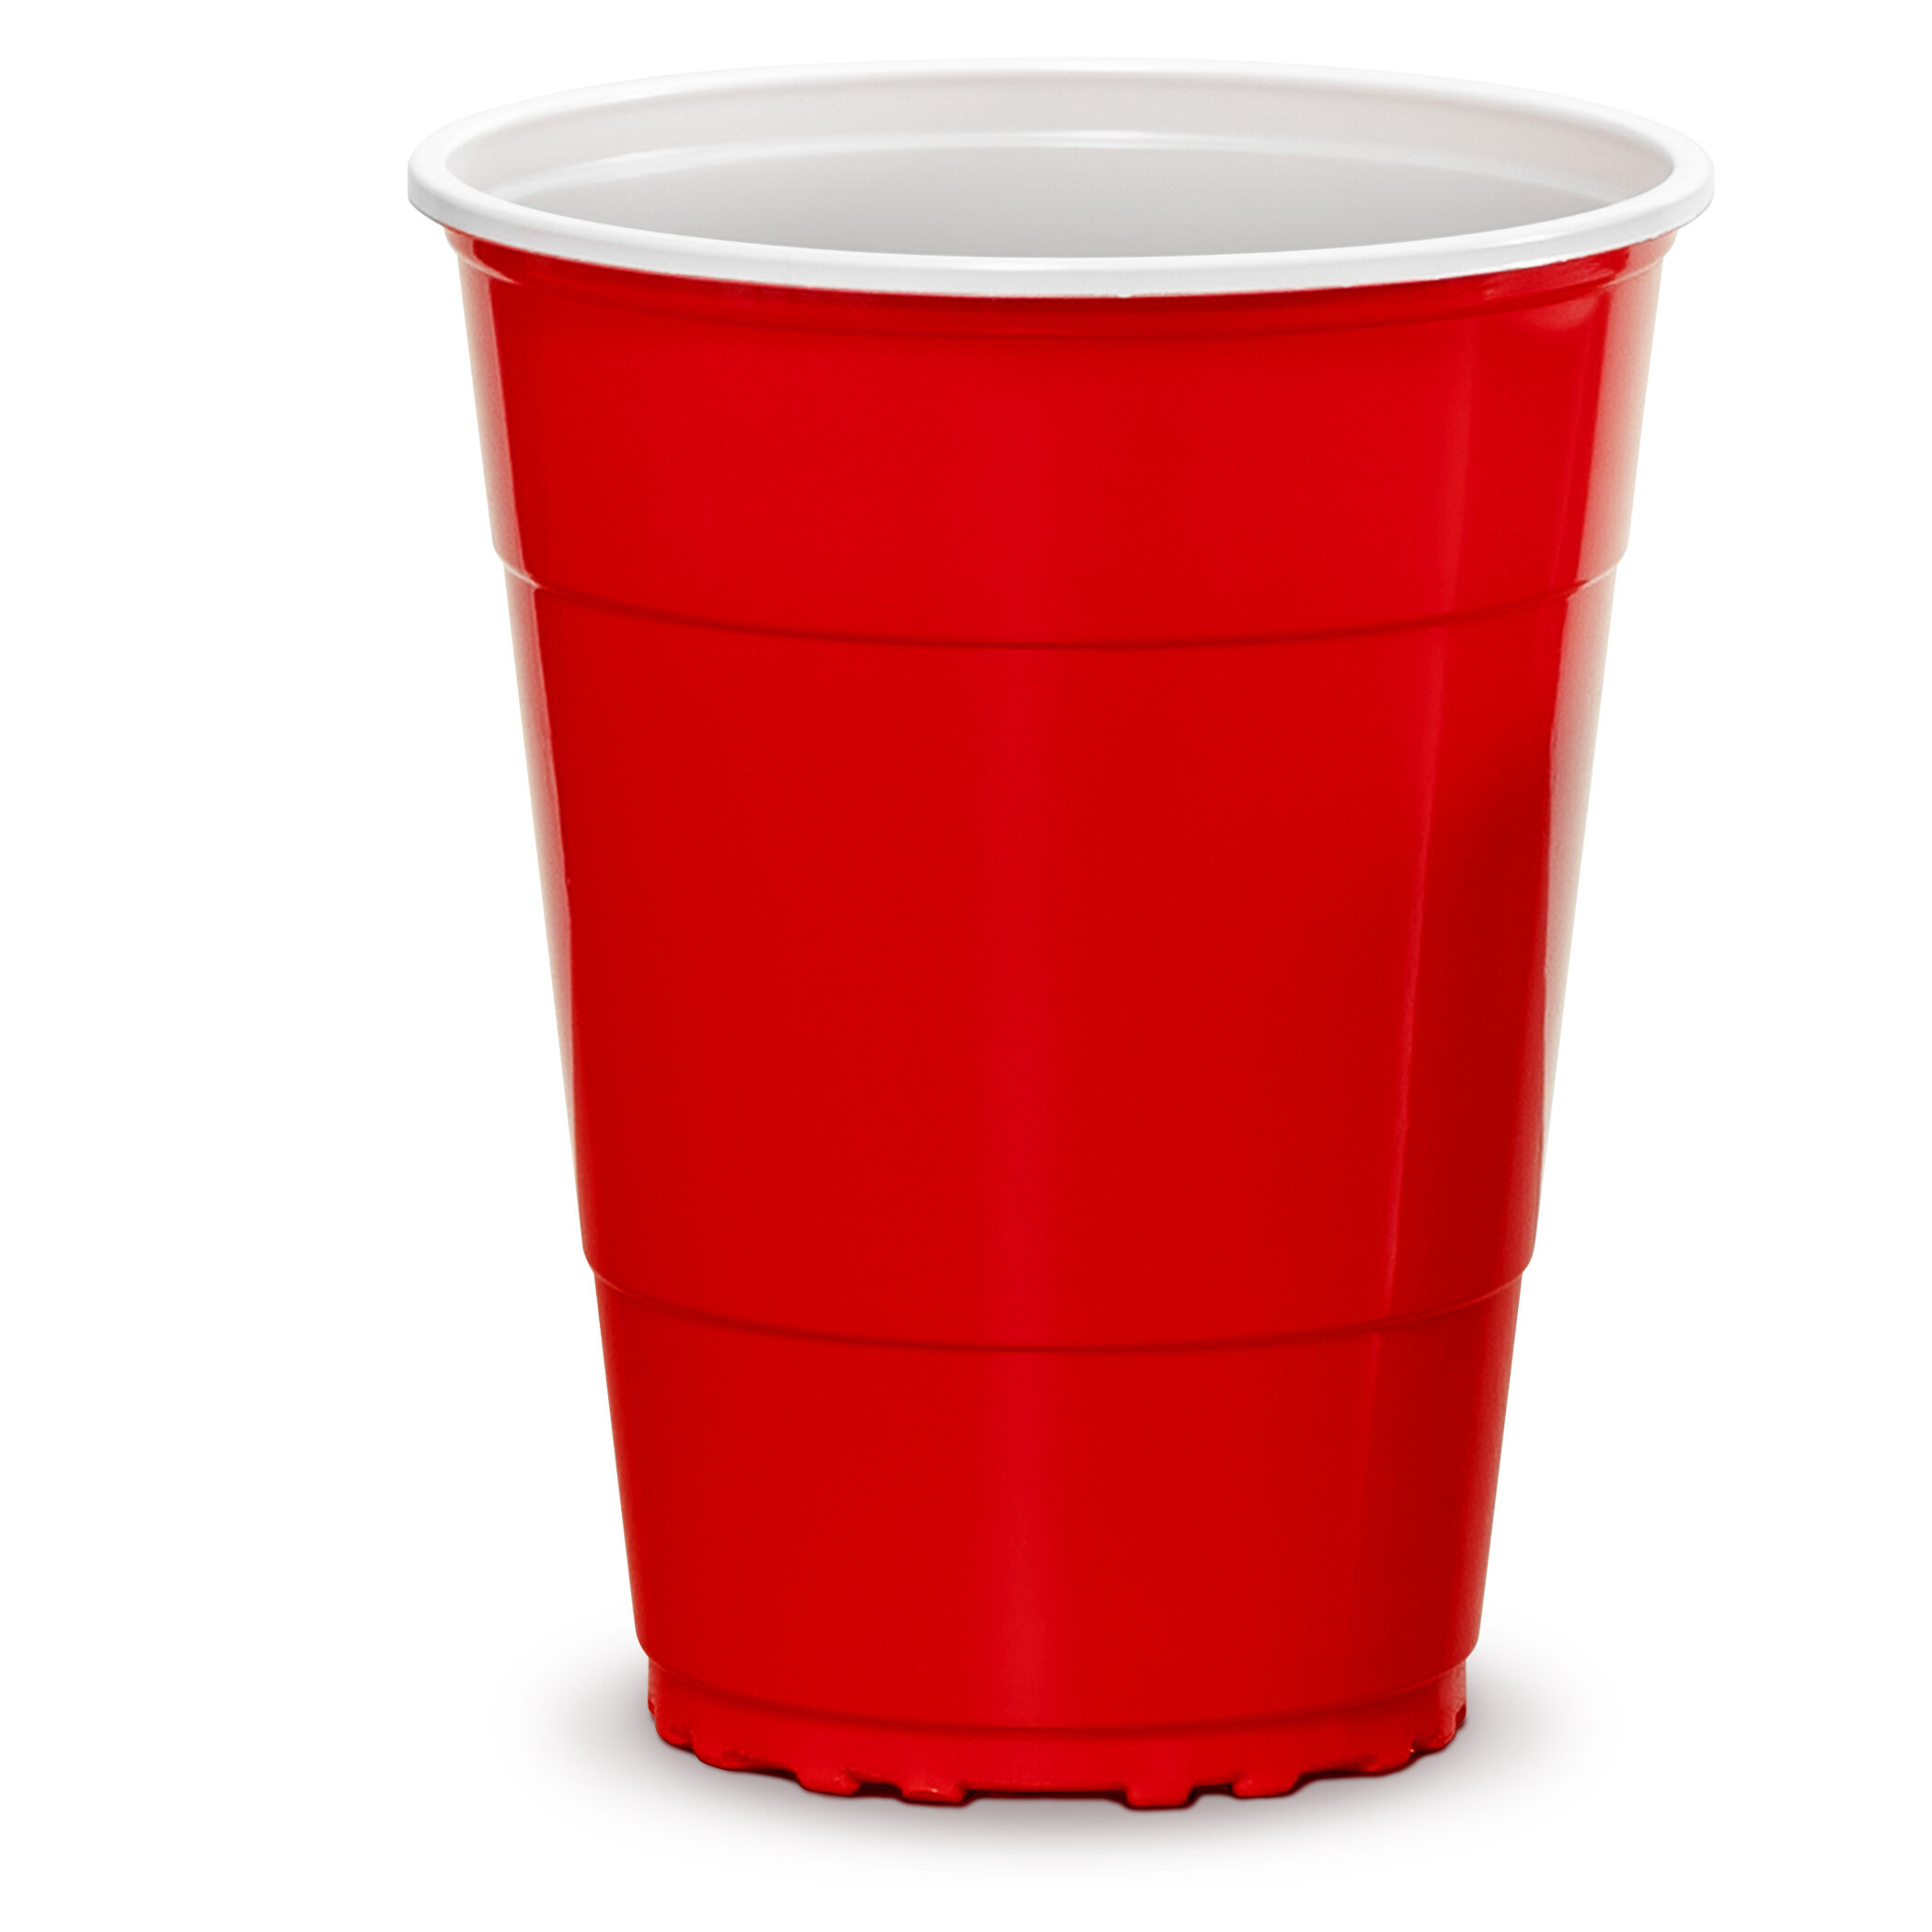 Gobig 36oz Giant Party Cups